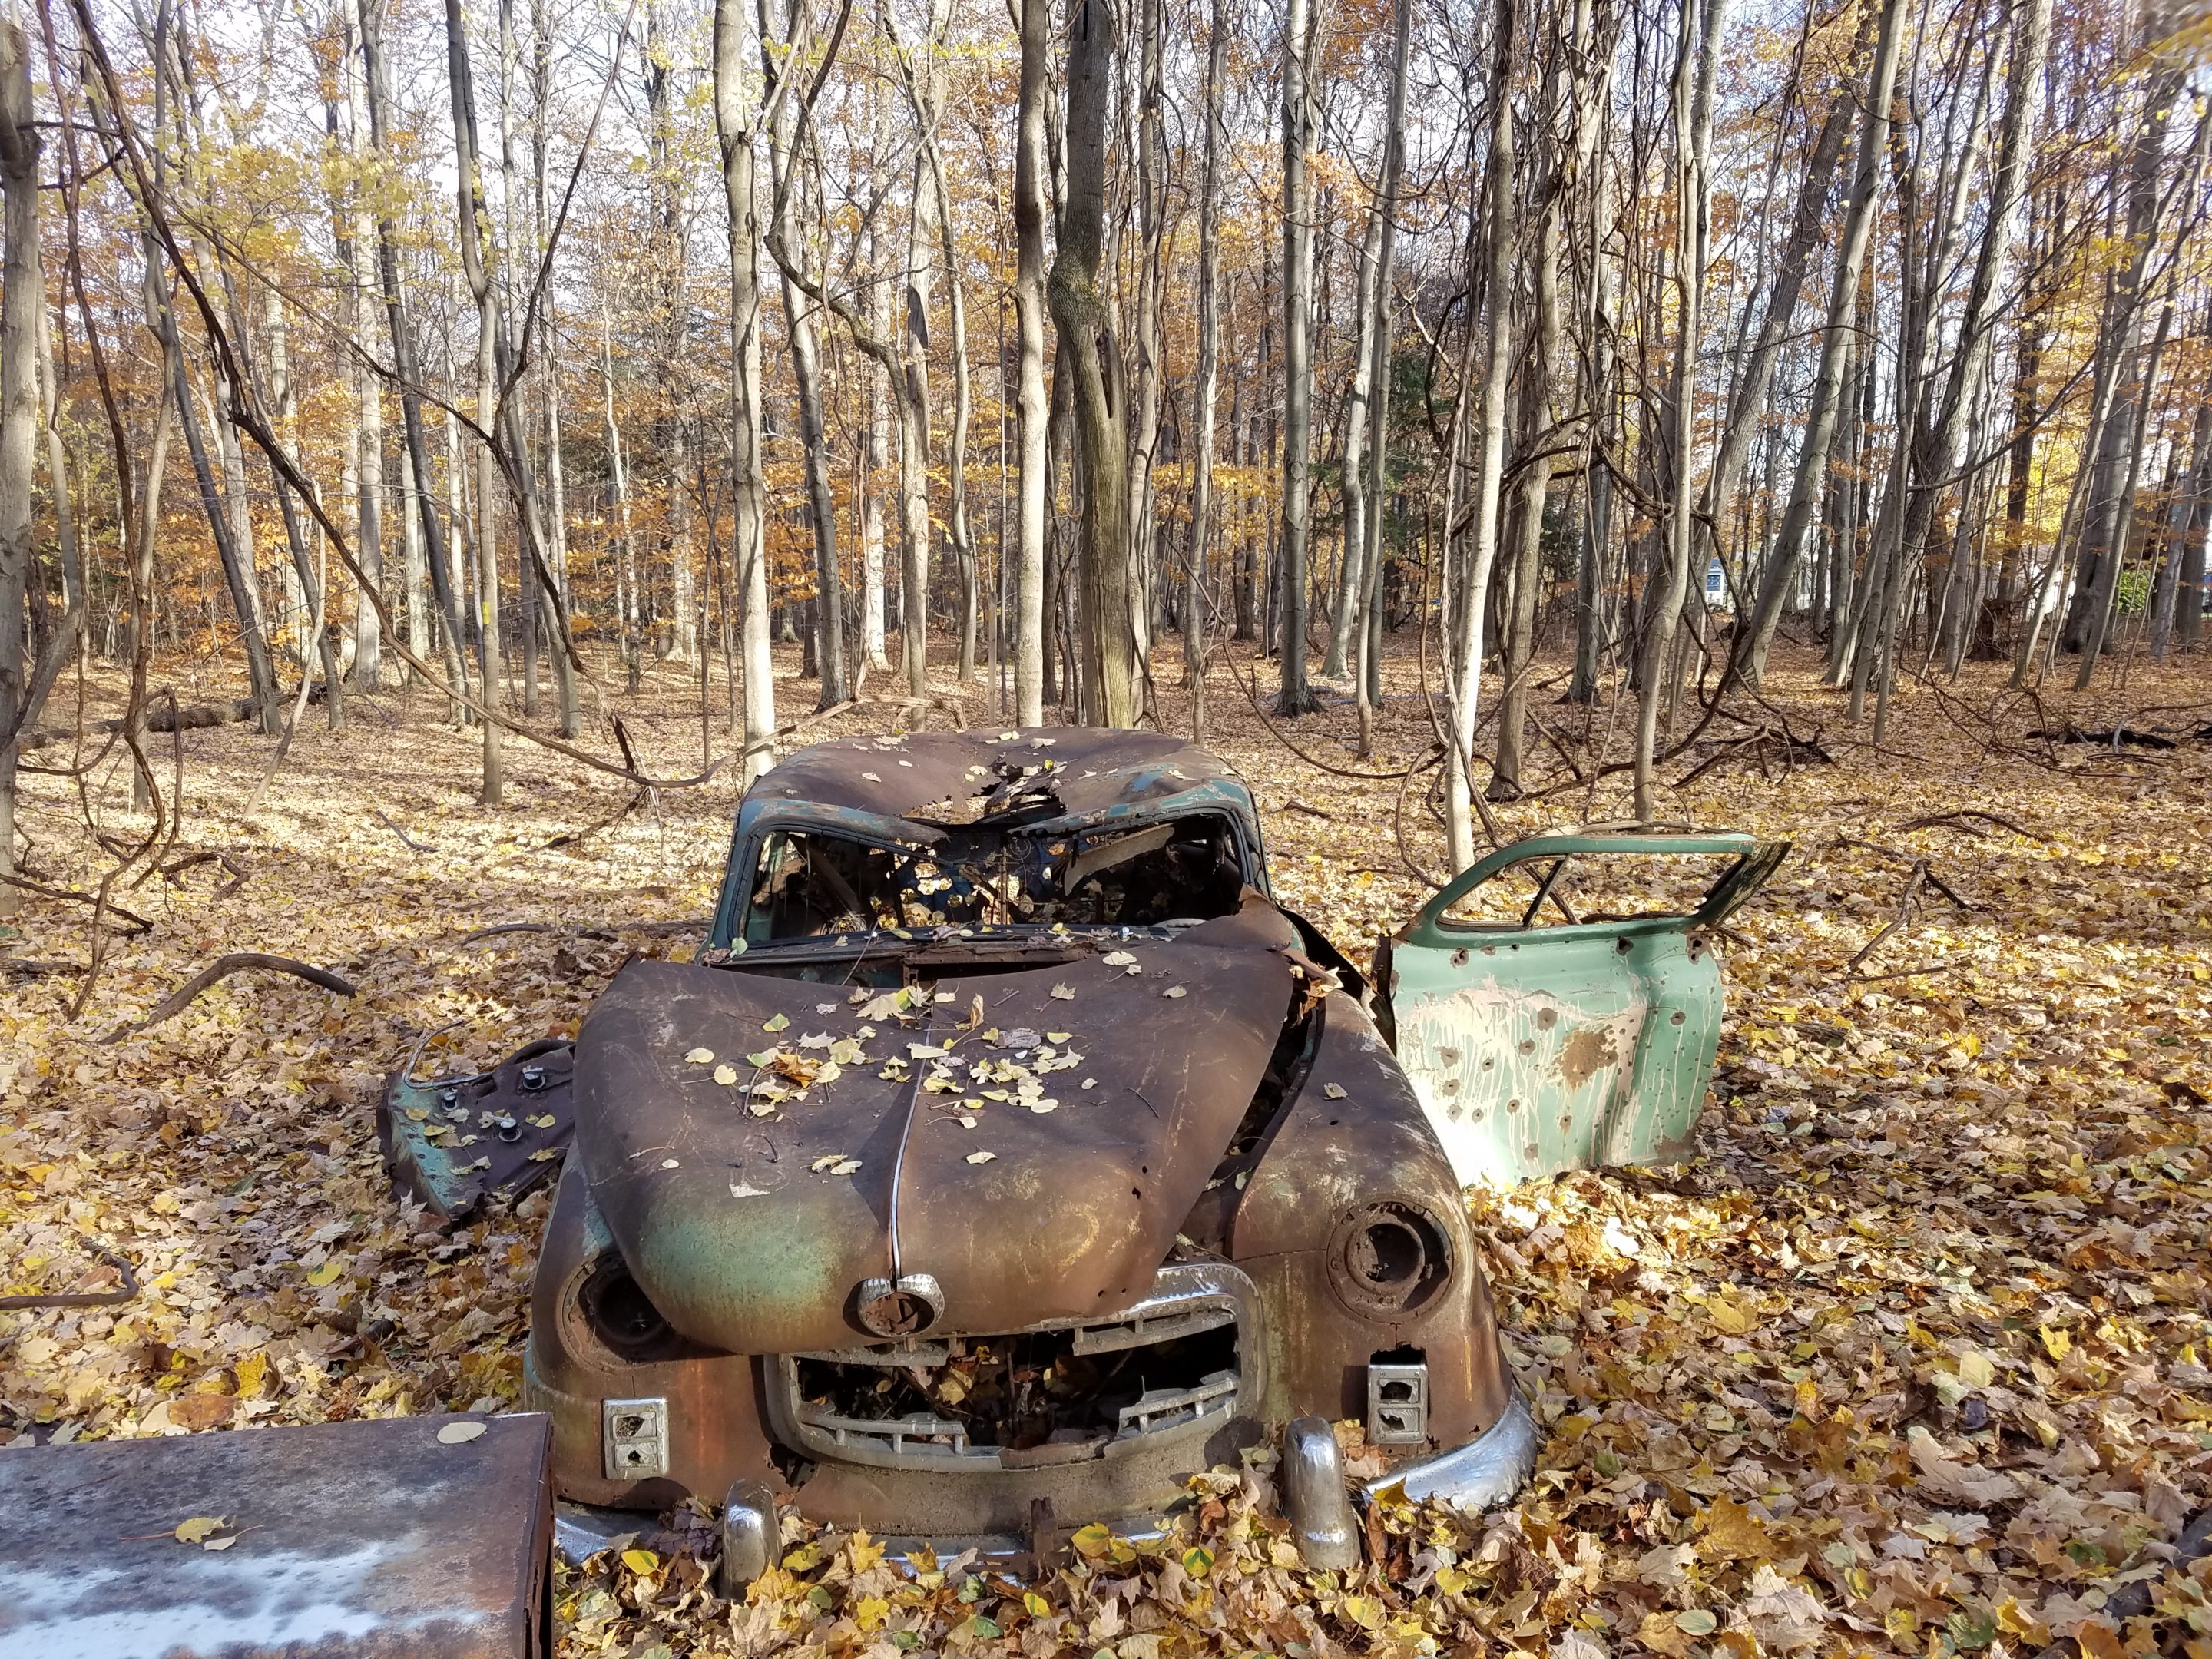 Abandoned car circa 1940s in Four Mile Creek Preserve